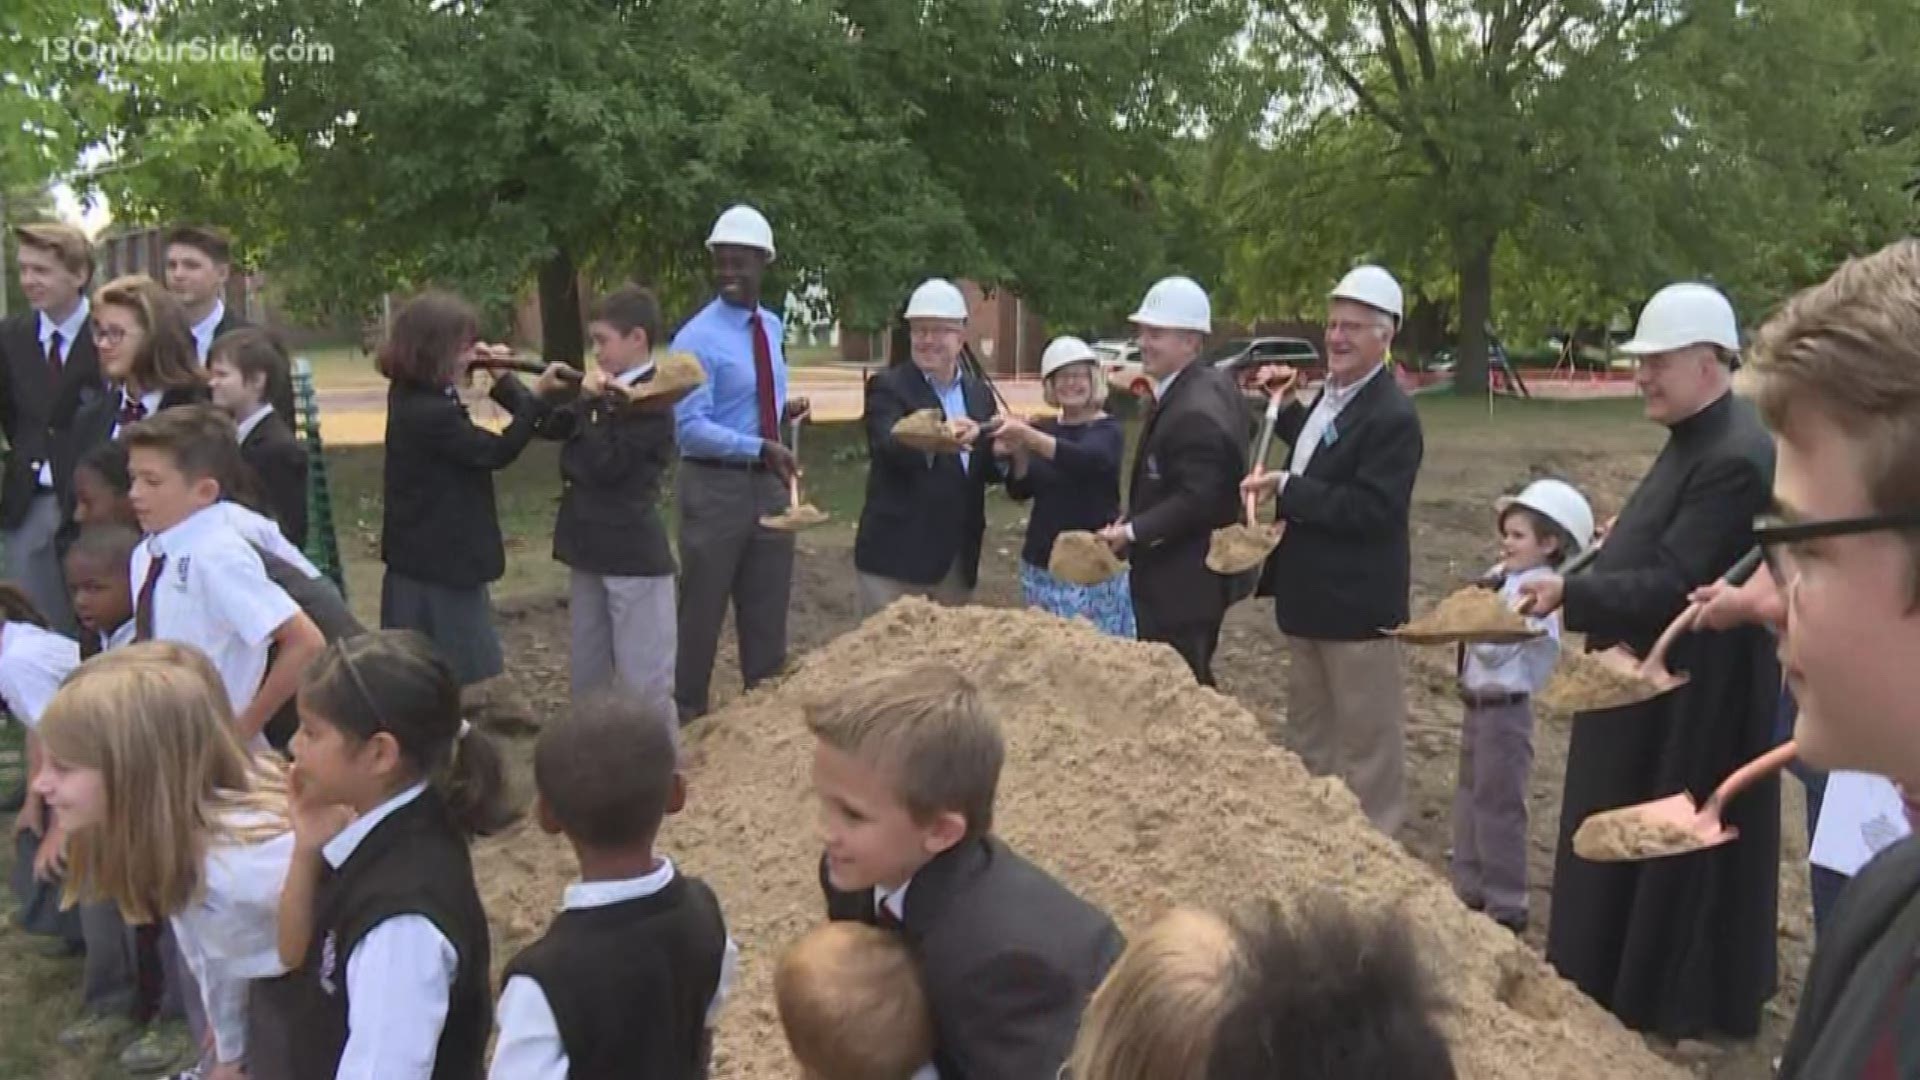 The playground will be located on the southeast side of John Ball Zoo's park near Sacred Heart Academy.